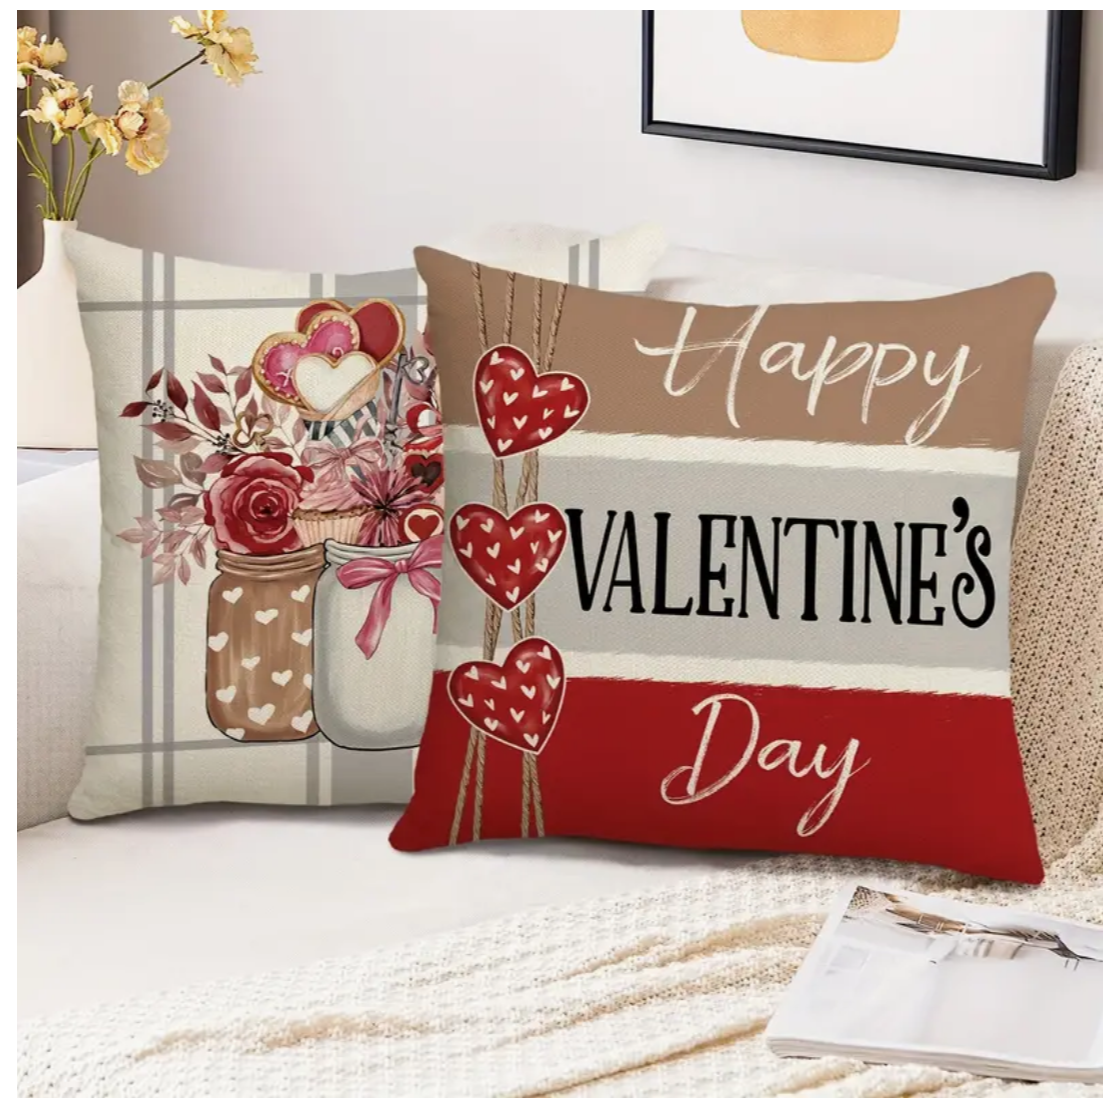 Love on Wheels: Set of 4 Valentine's Day Pillowcases for Stylish Sofa Bliss – Red Truck Romance in 17.7*17.7 Inches!